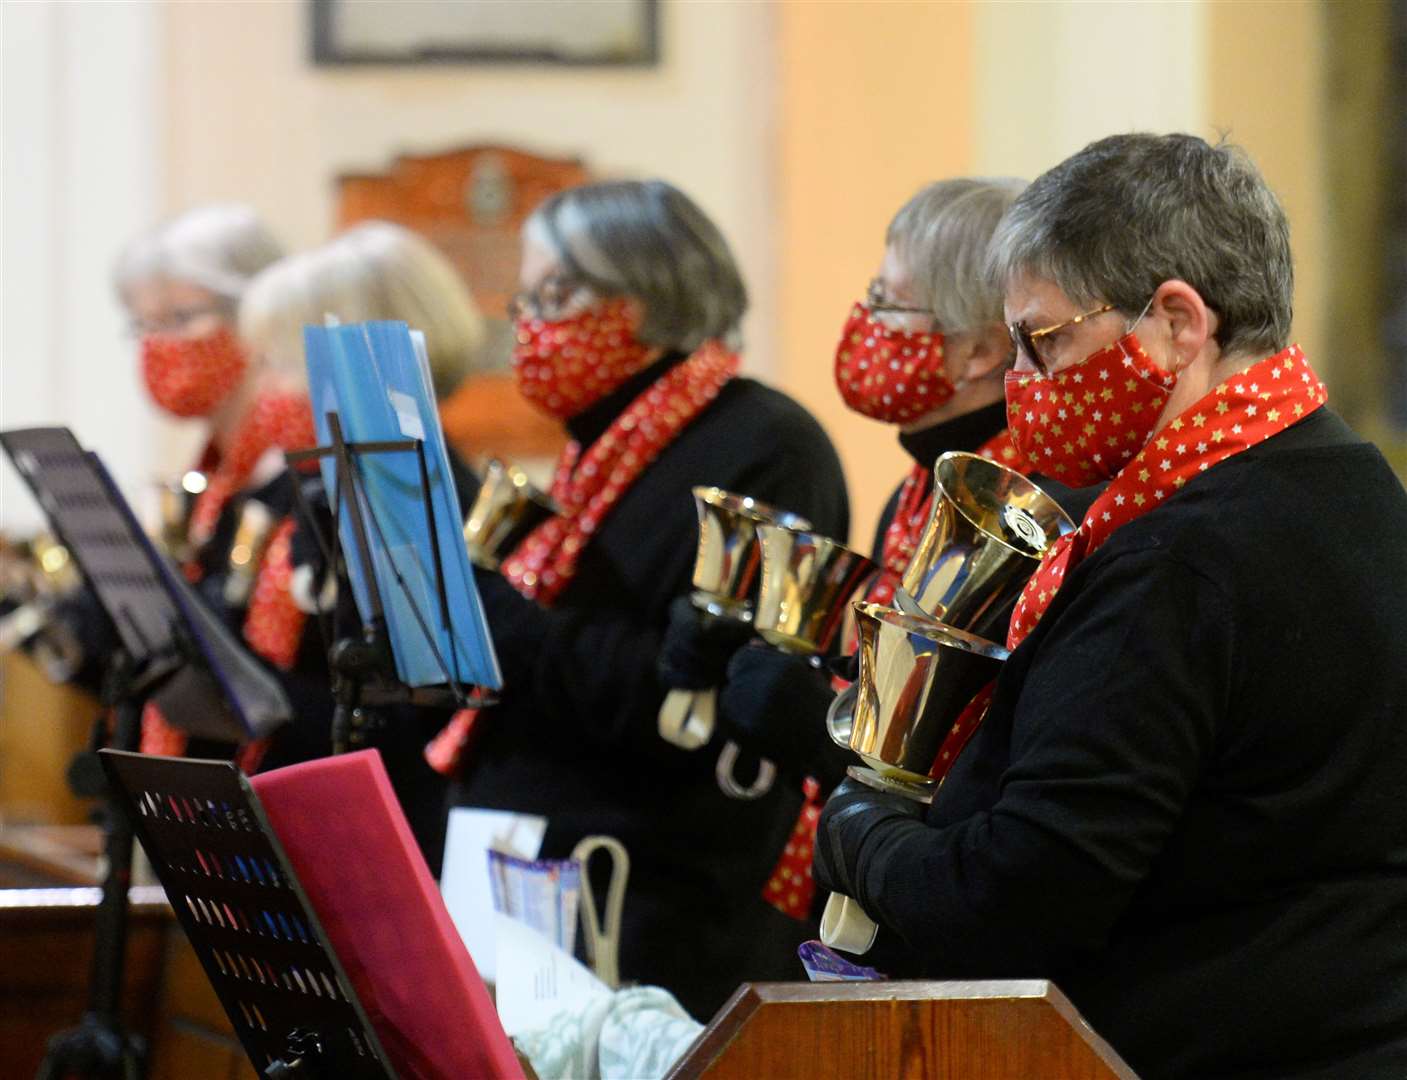 Inverness Handbells. Pictures: Gary Anthony